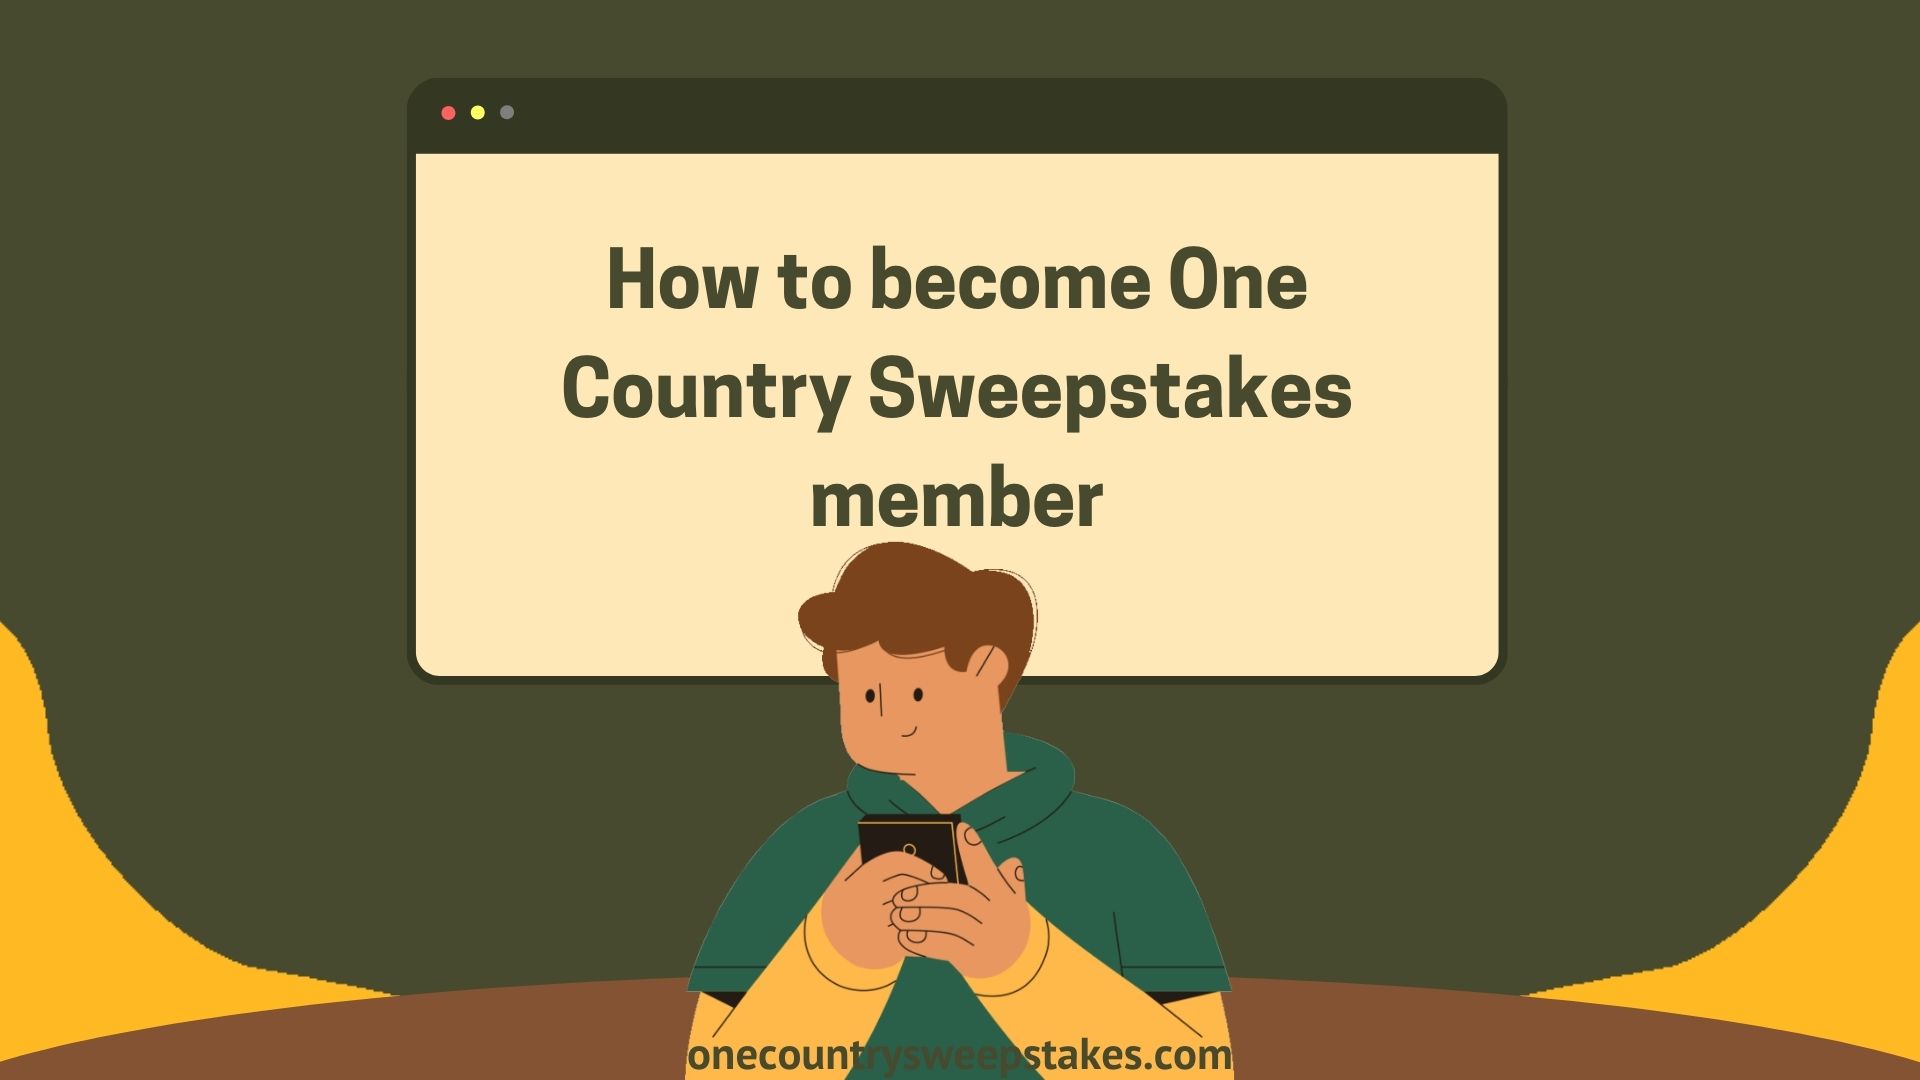 How to become One Country Sweepstakes member